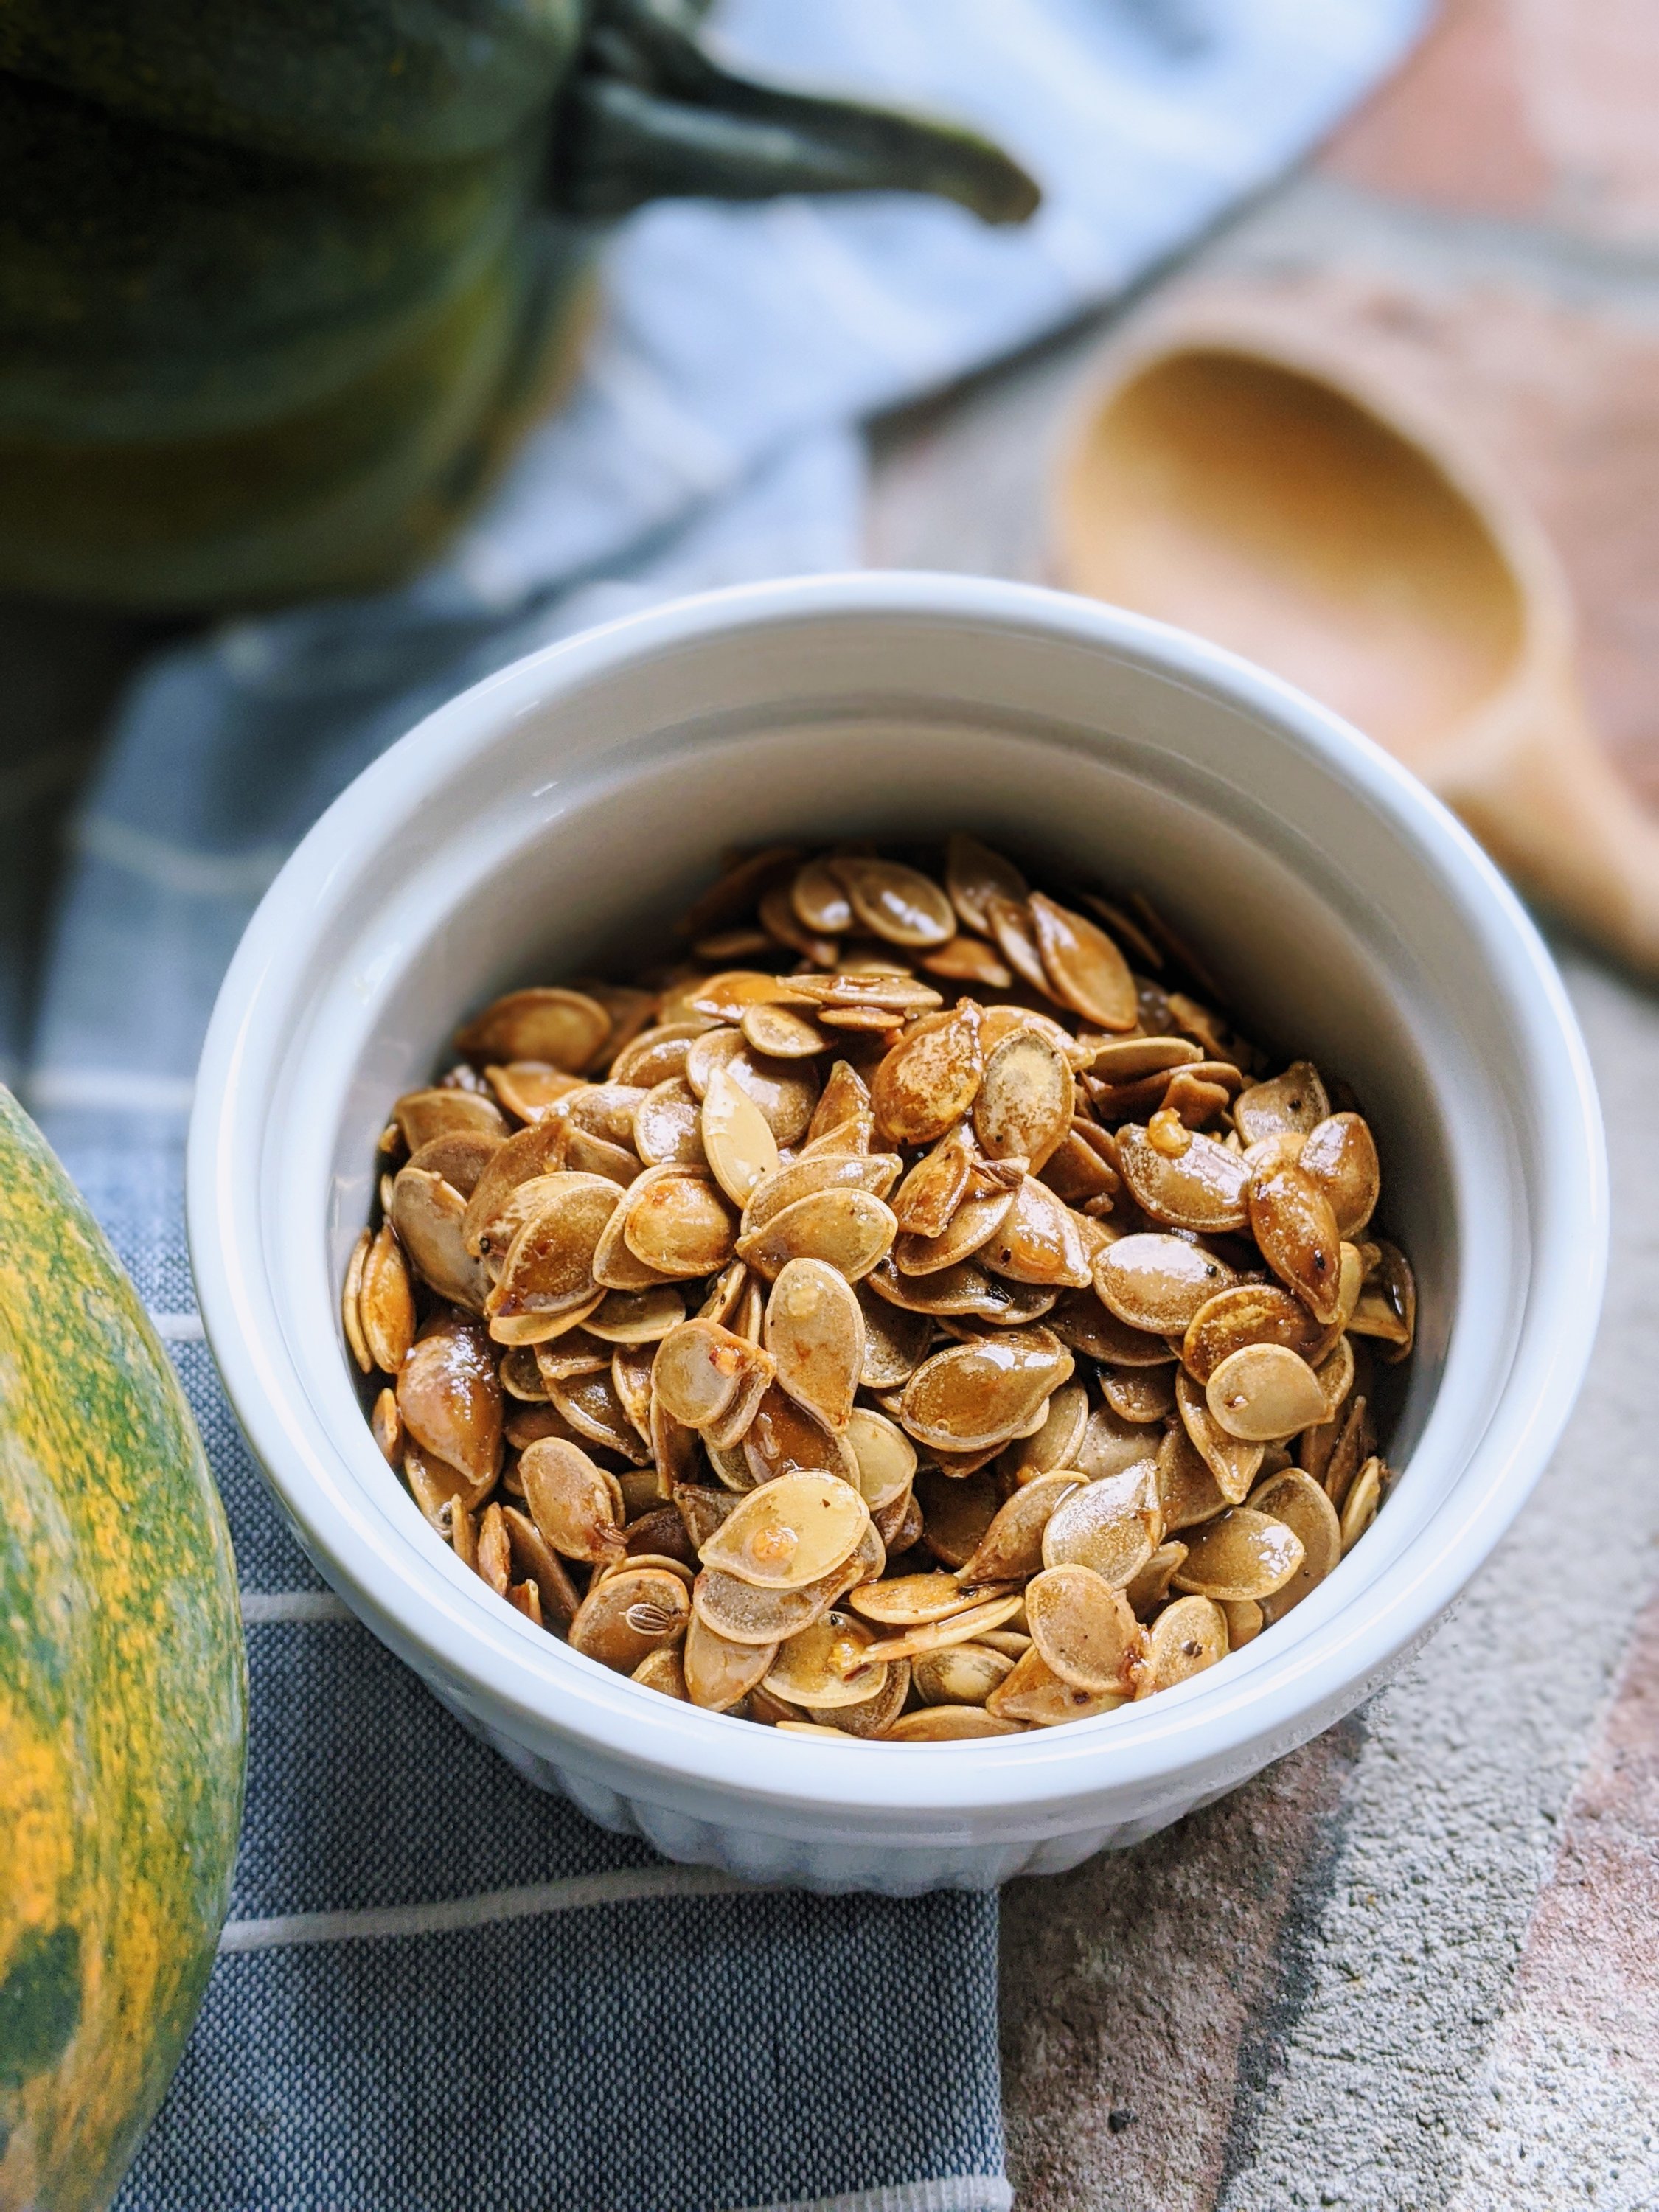 roasted low and slow acorn squash seeds for healthy amazing flavor great high fiber snack recipes easy homemade gluten free vegan vegetarian meatless snacks